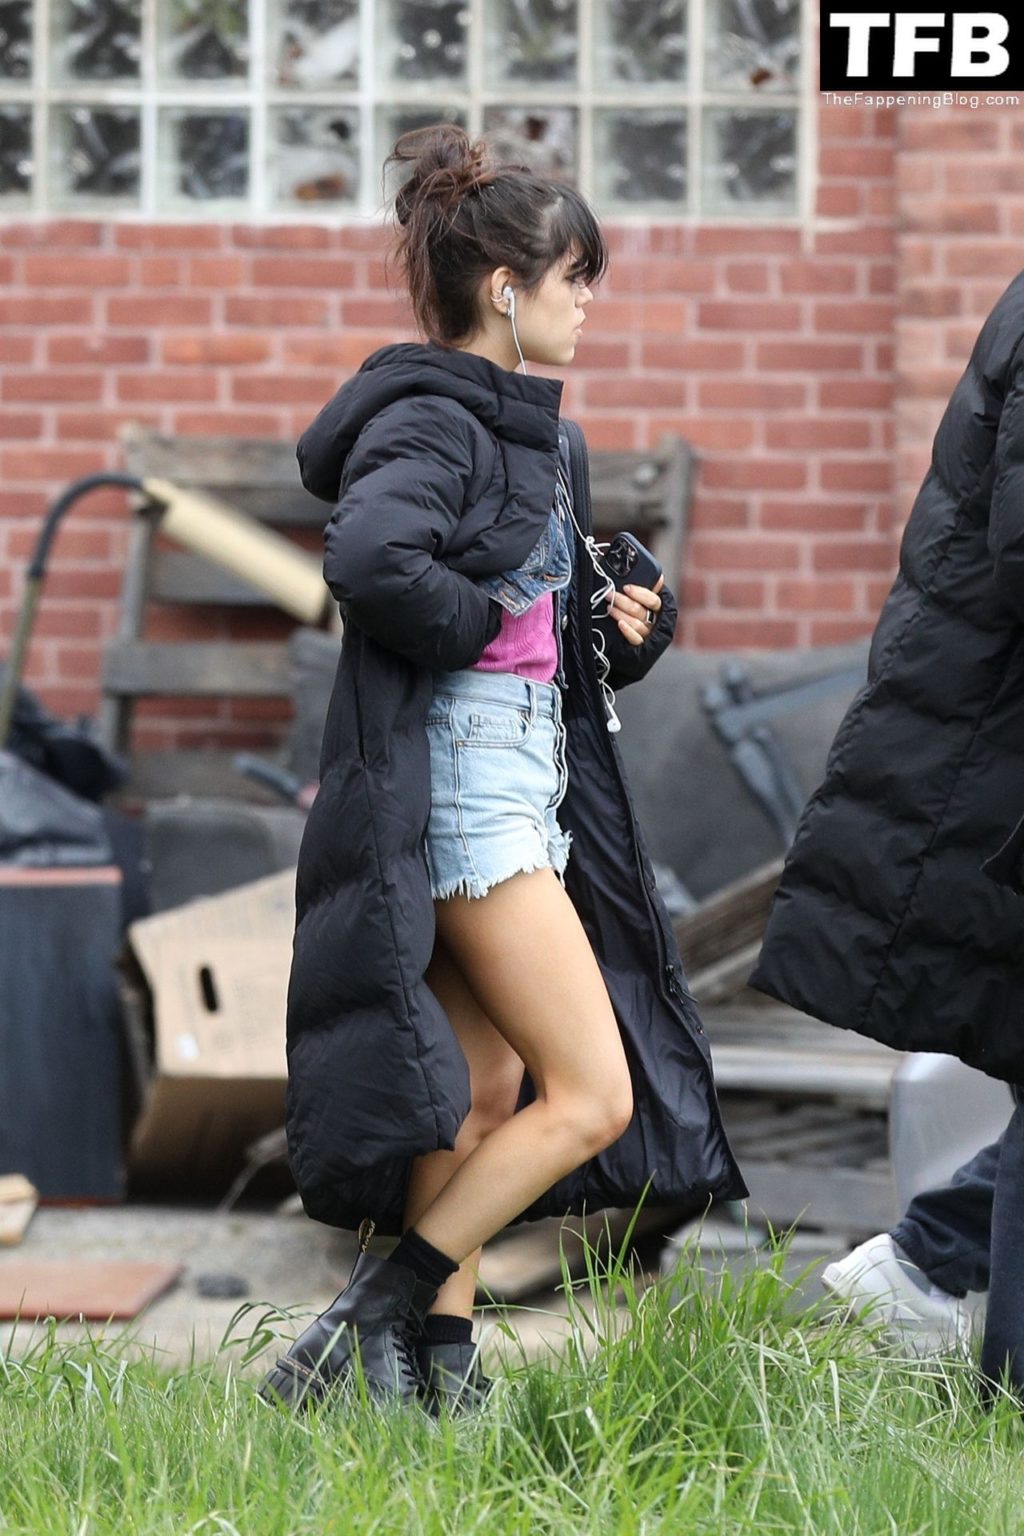 Jenna Ortega Sexy The Fappening Blog 14 1024x1536 - Leggy Jenna Ortega is Spotted in Short Shorts on the Set of “Finest Kind” (24 Photos)